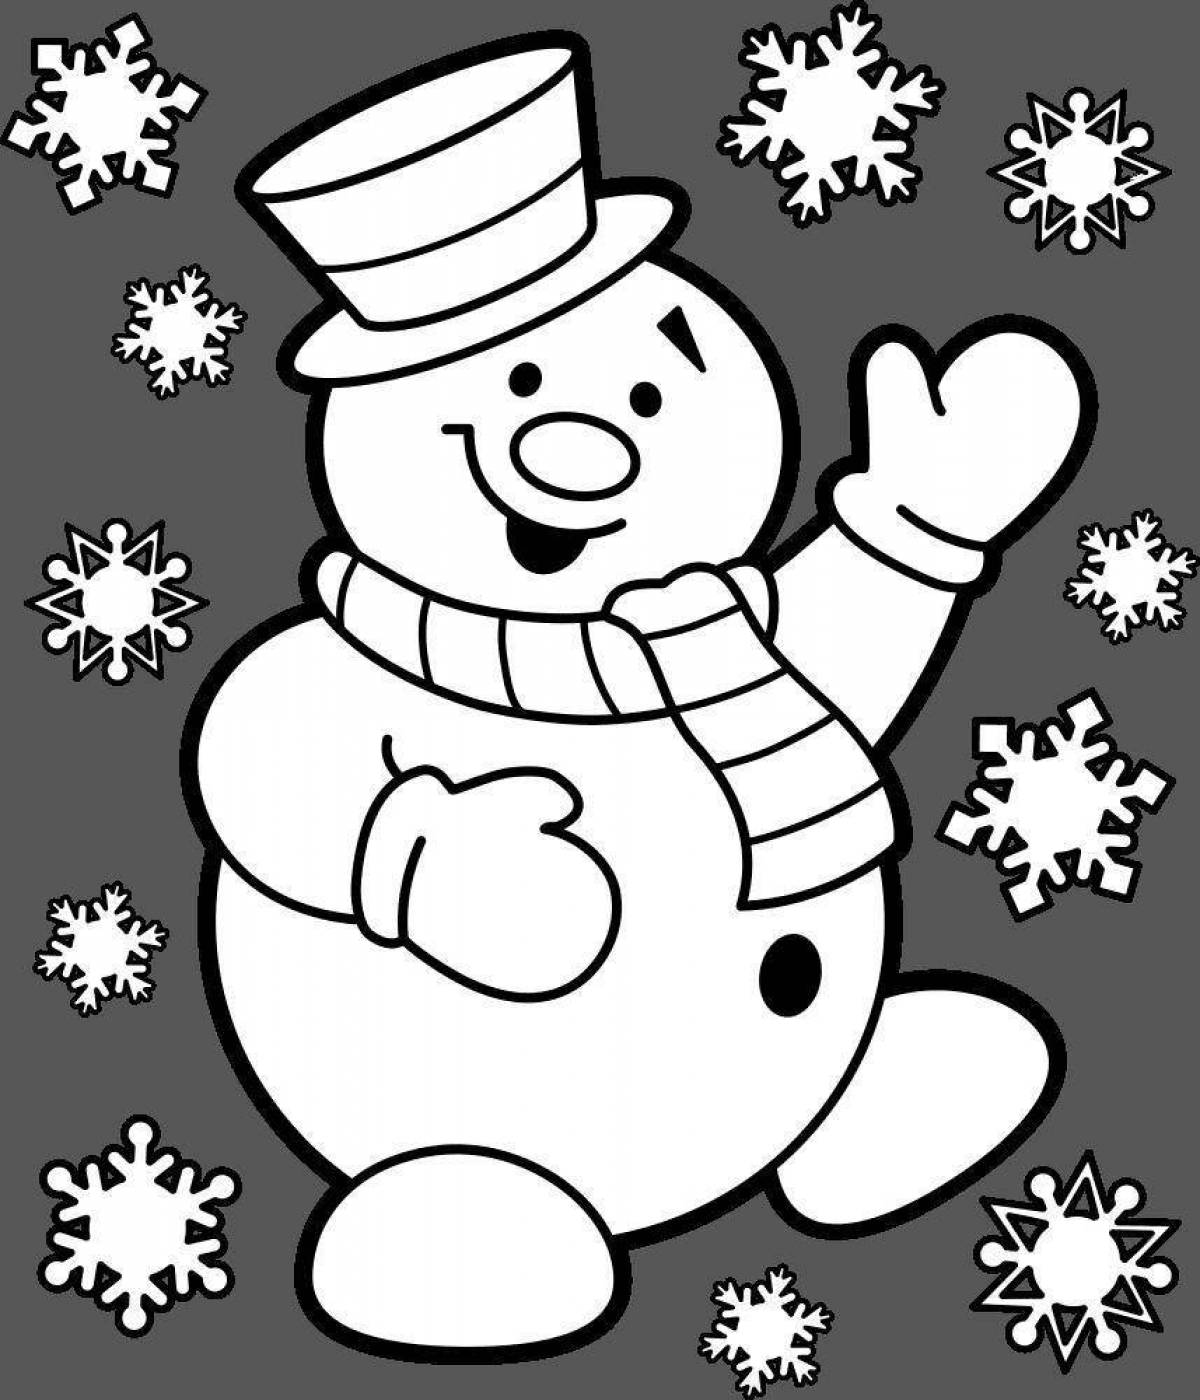 Festive Christmas coloring book for preschoolers